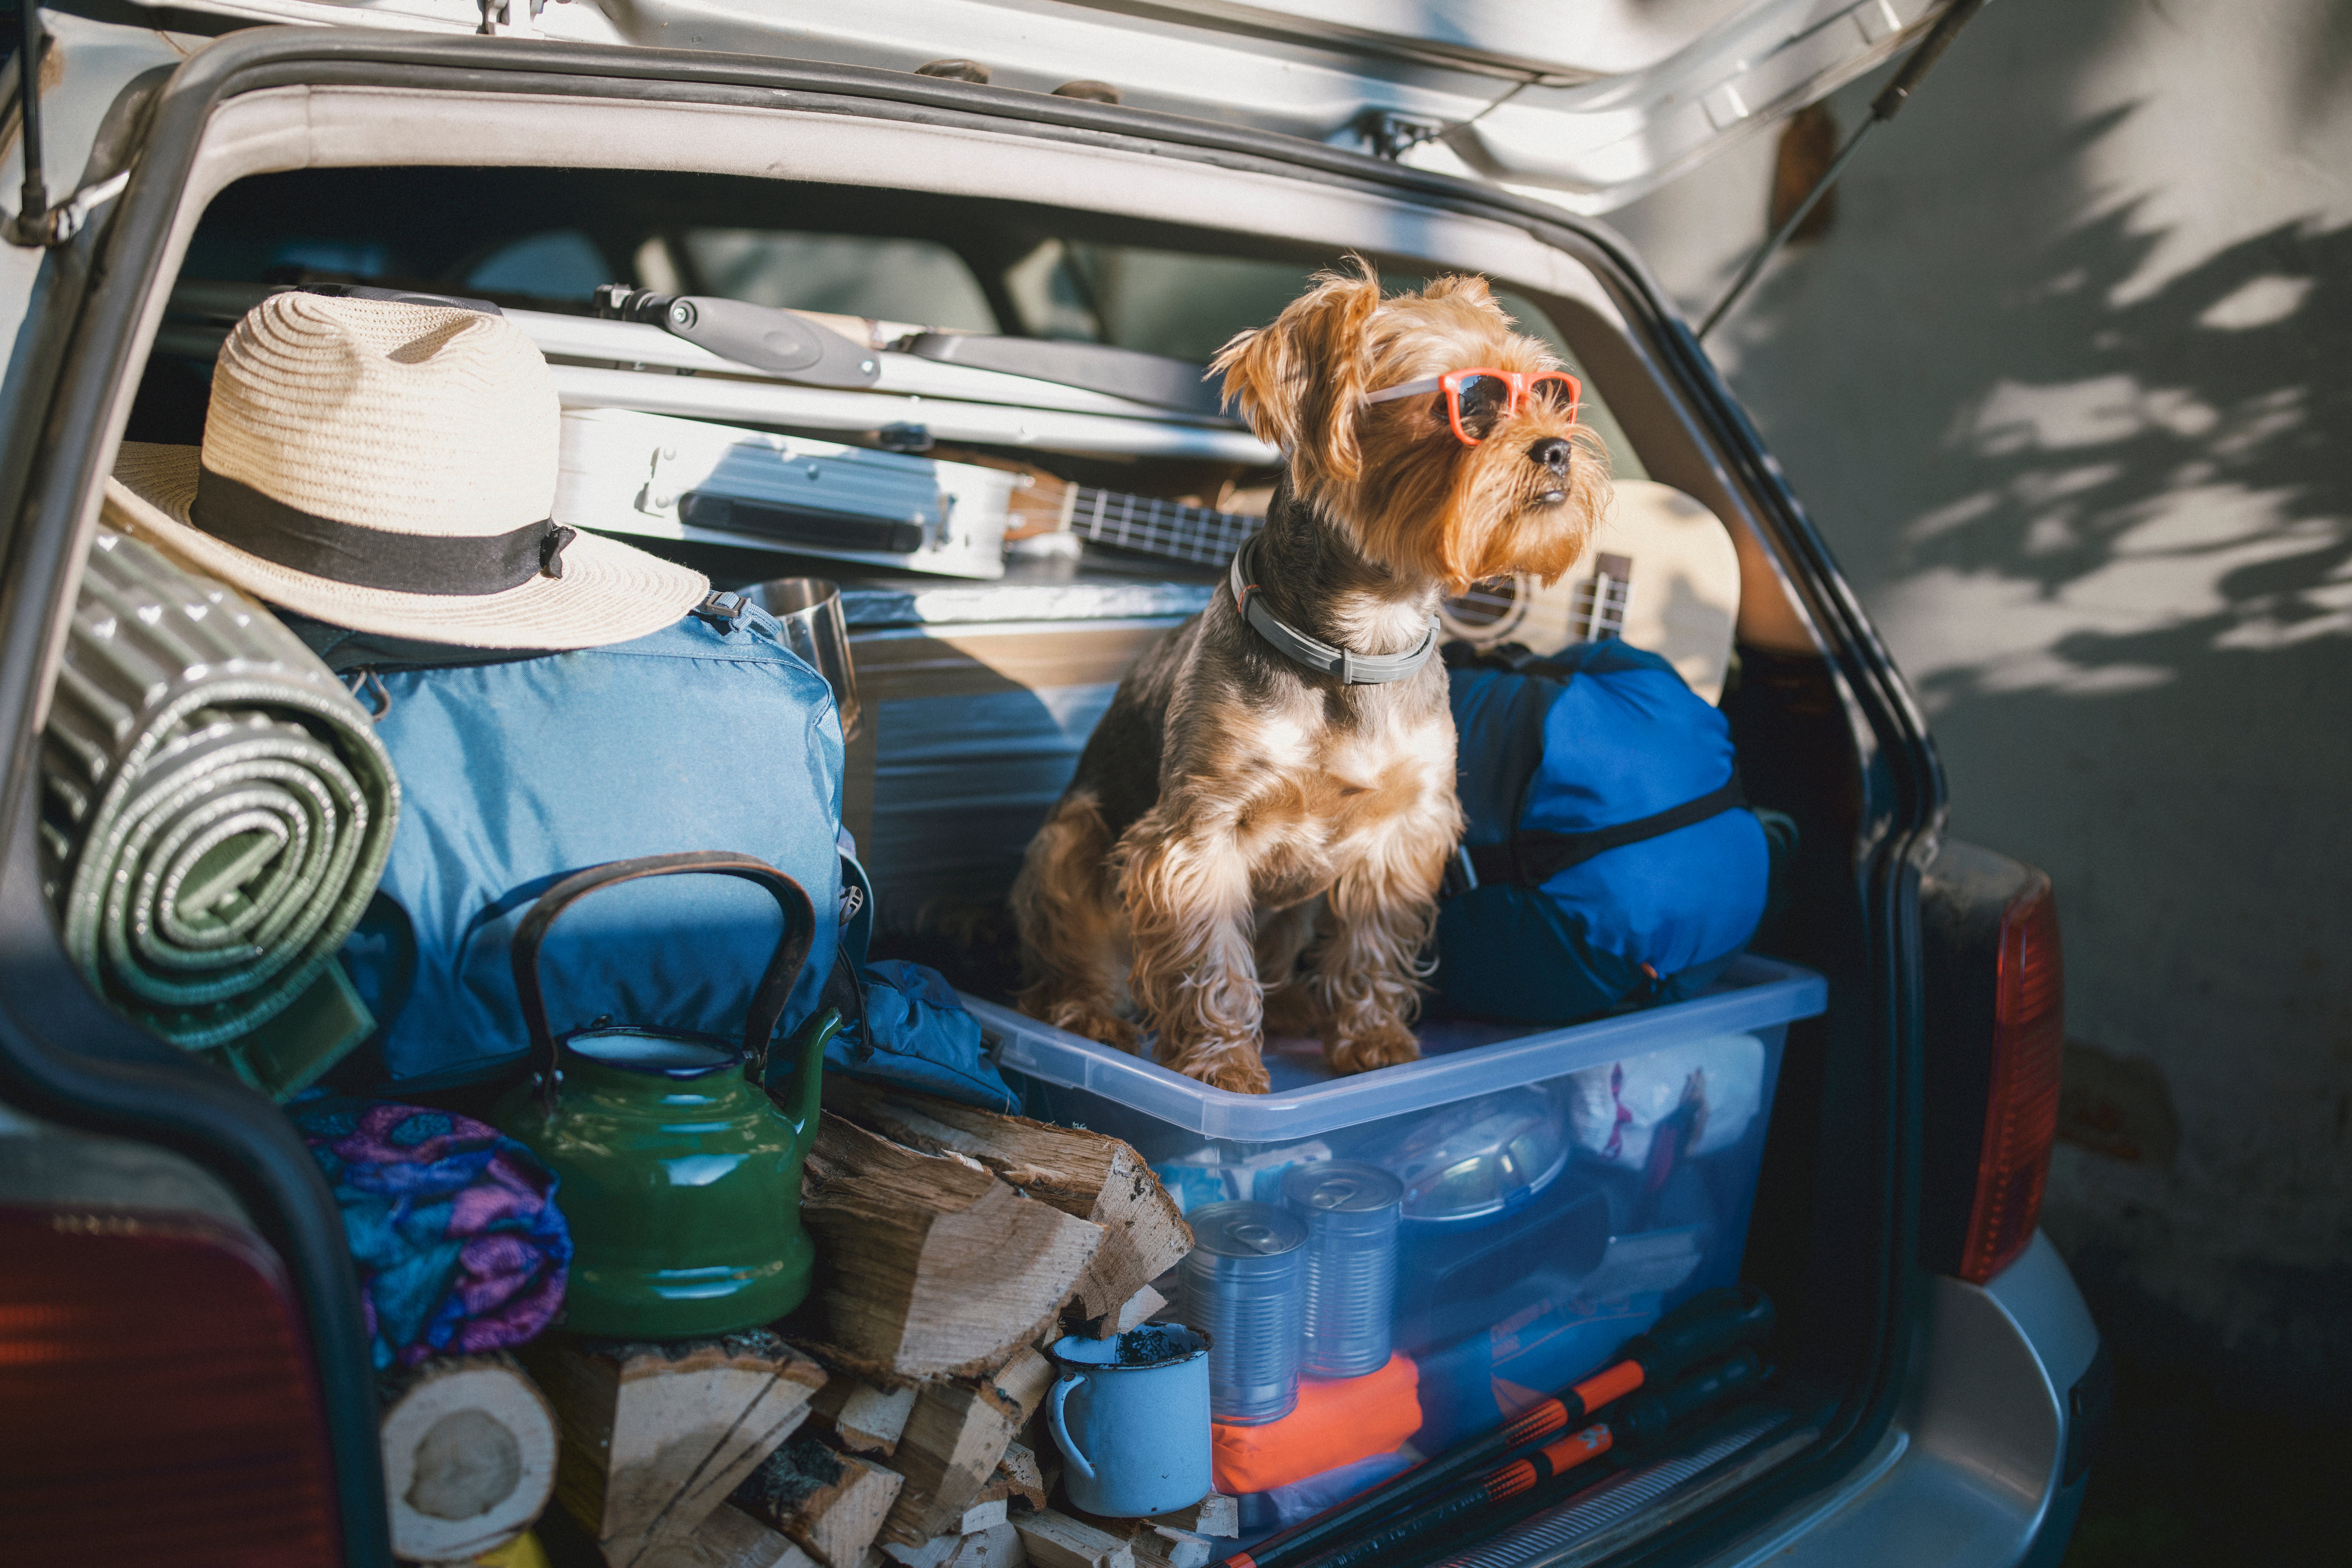 Hat, camping gear, family dog... but what else do you need to prep for your half-term roadtrip?